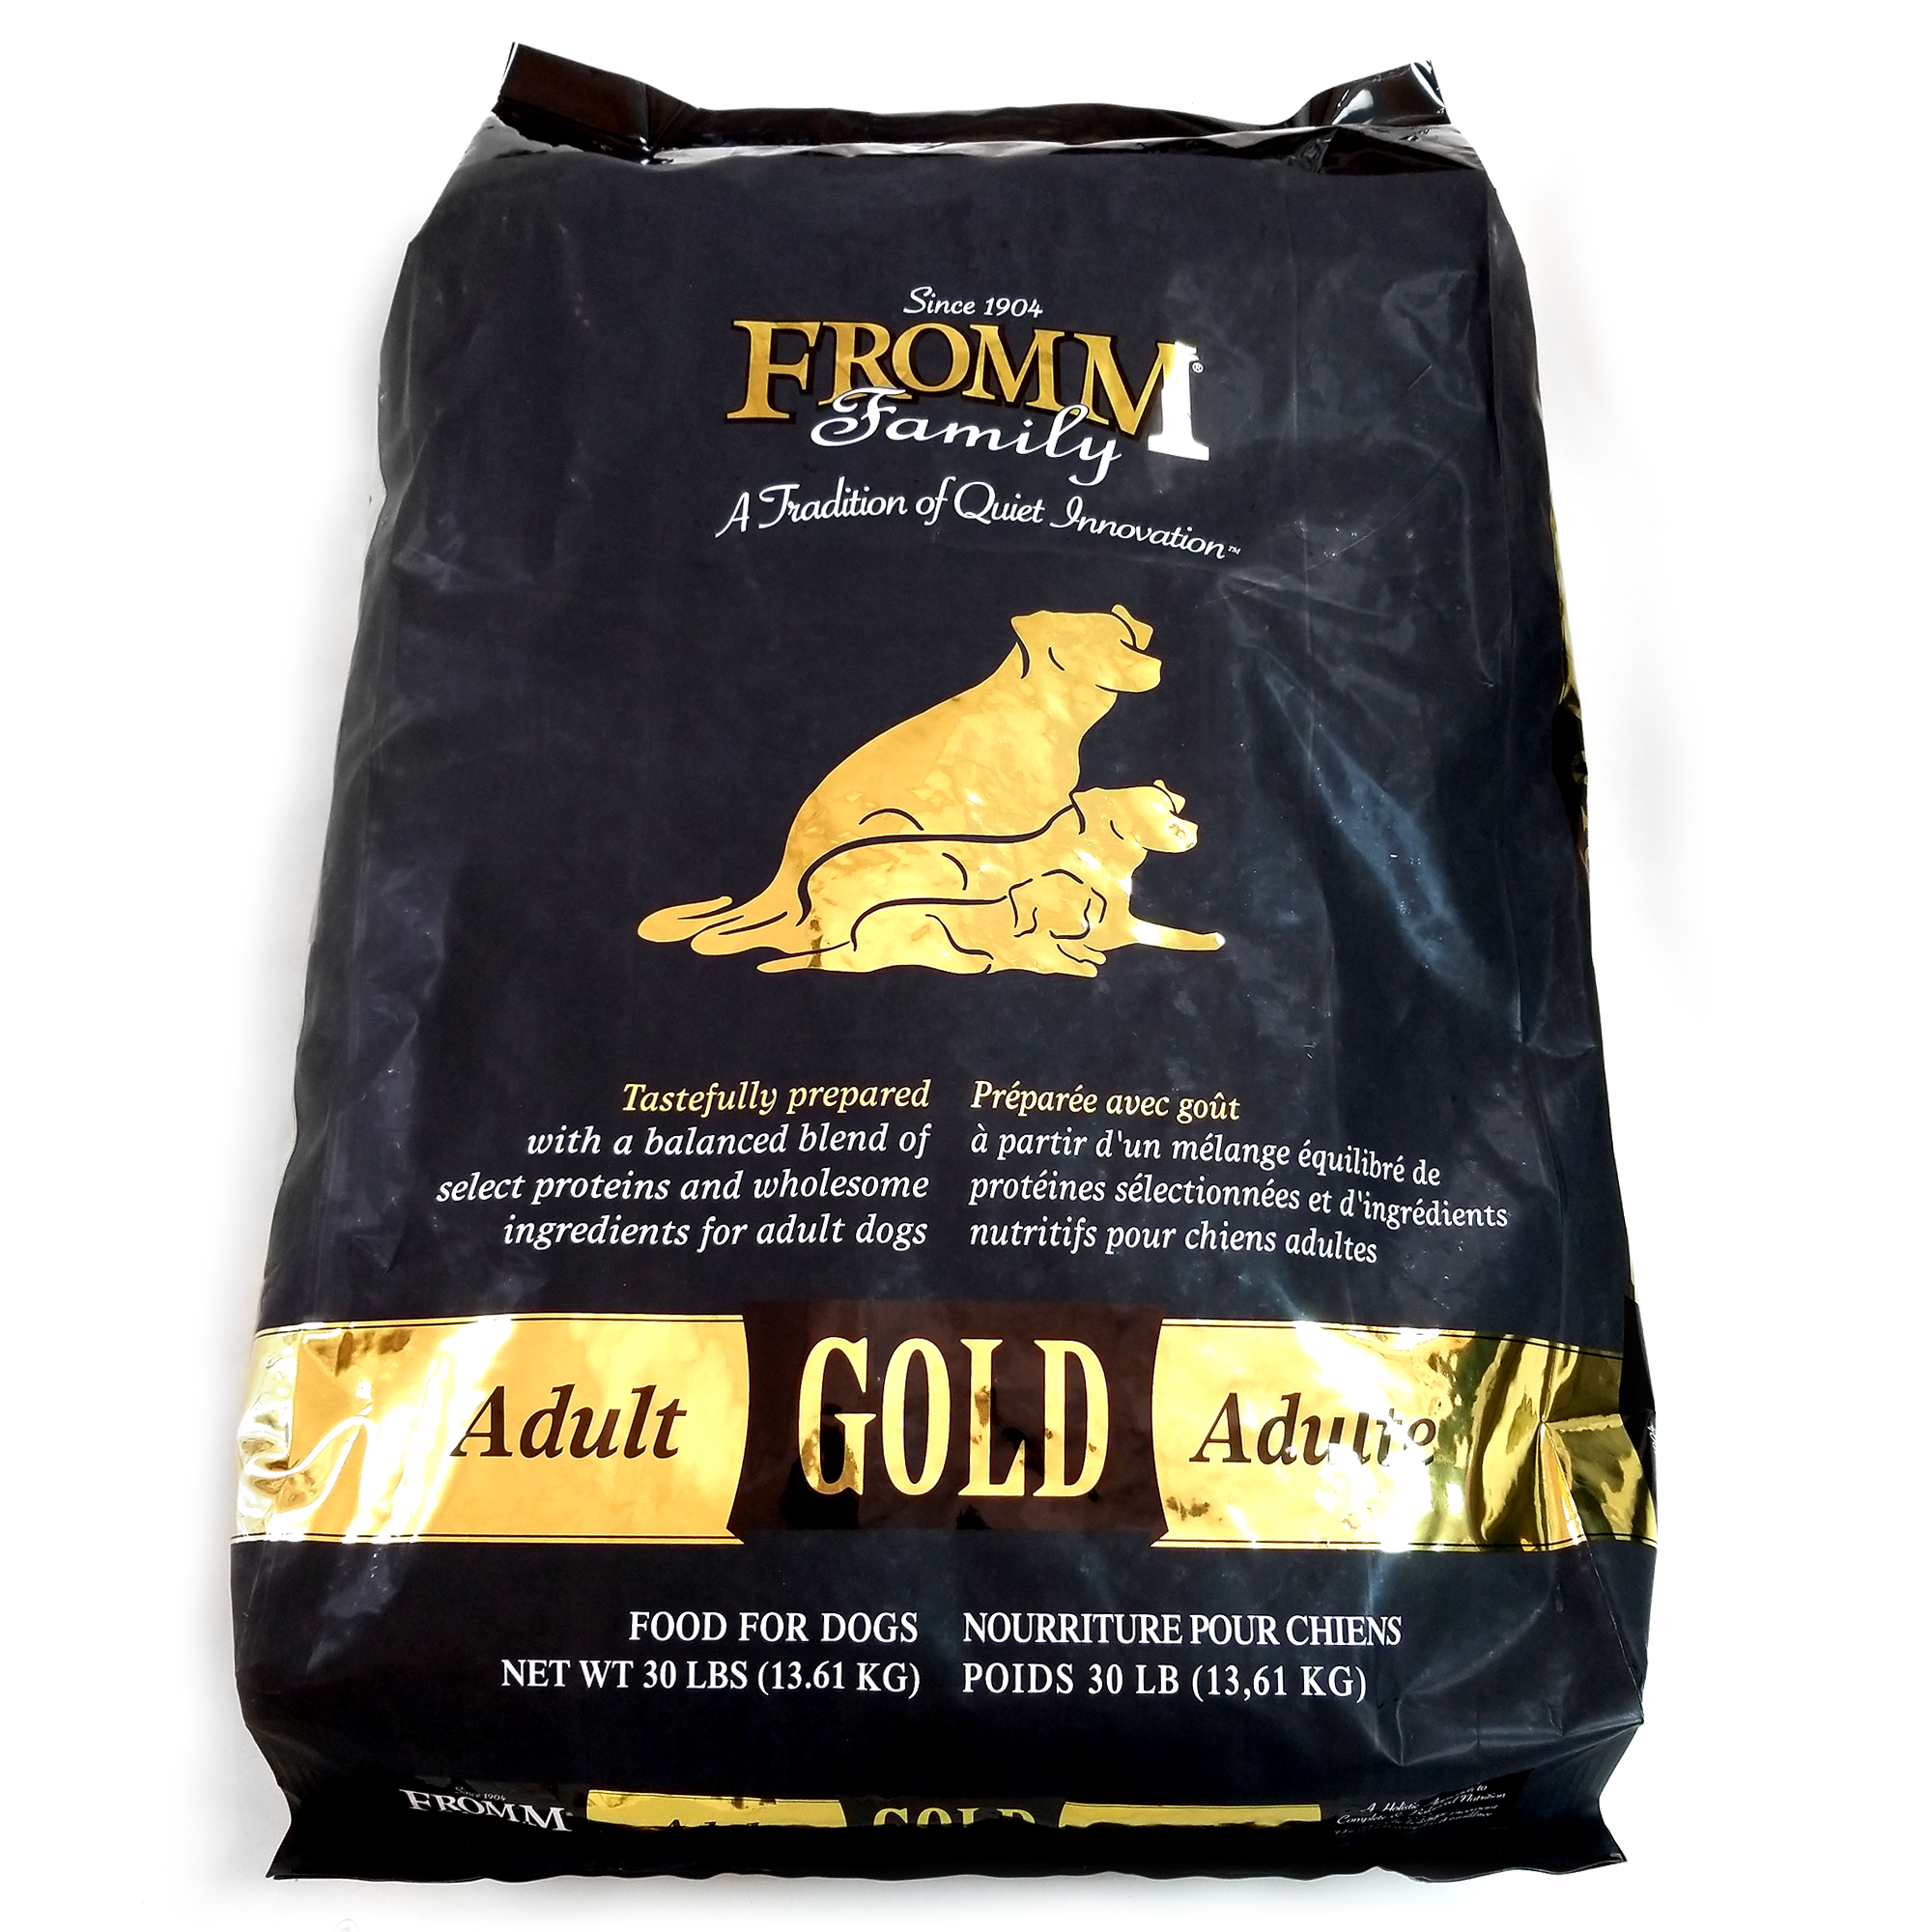 Fromm Family, Adult Gold